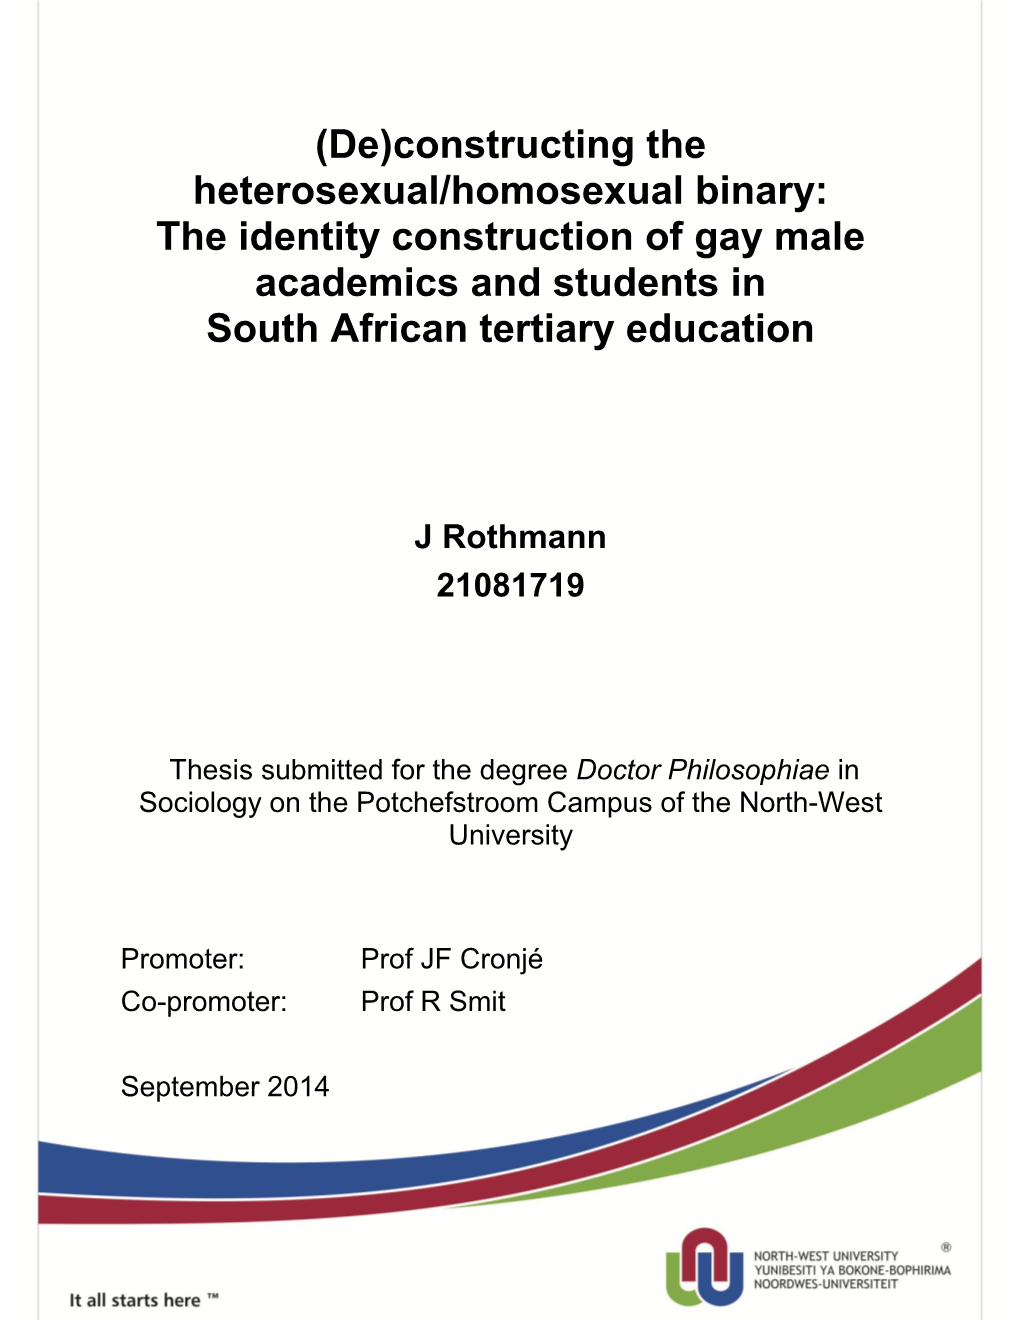 The Identity Construction of Gay Male Academics and Students in South African Tertiary Education